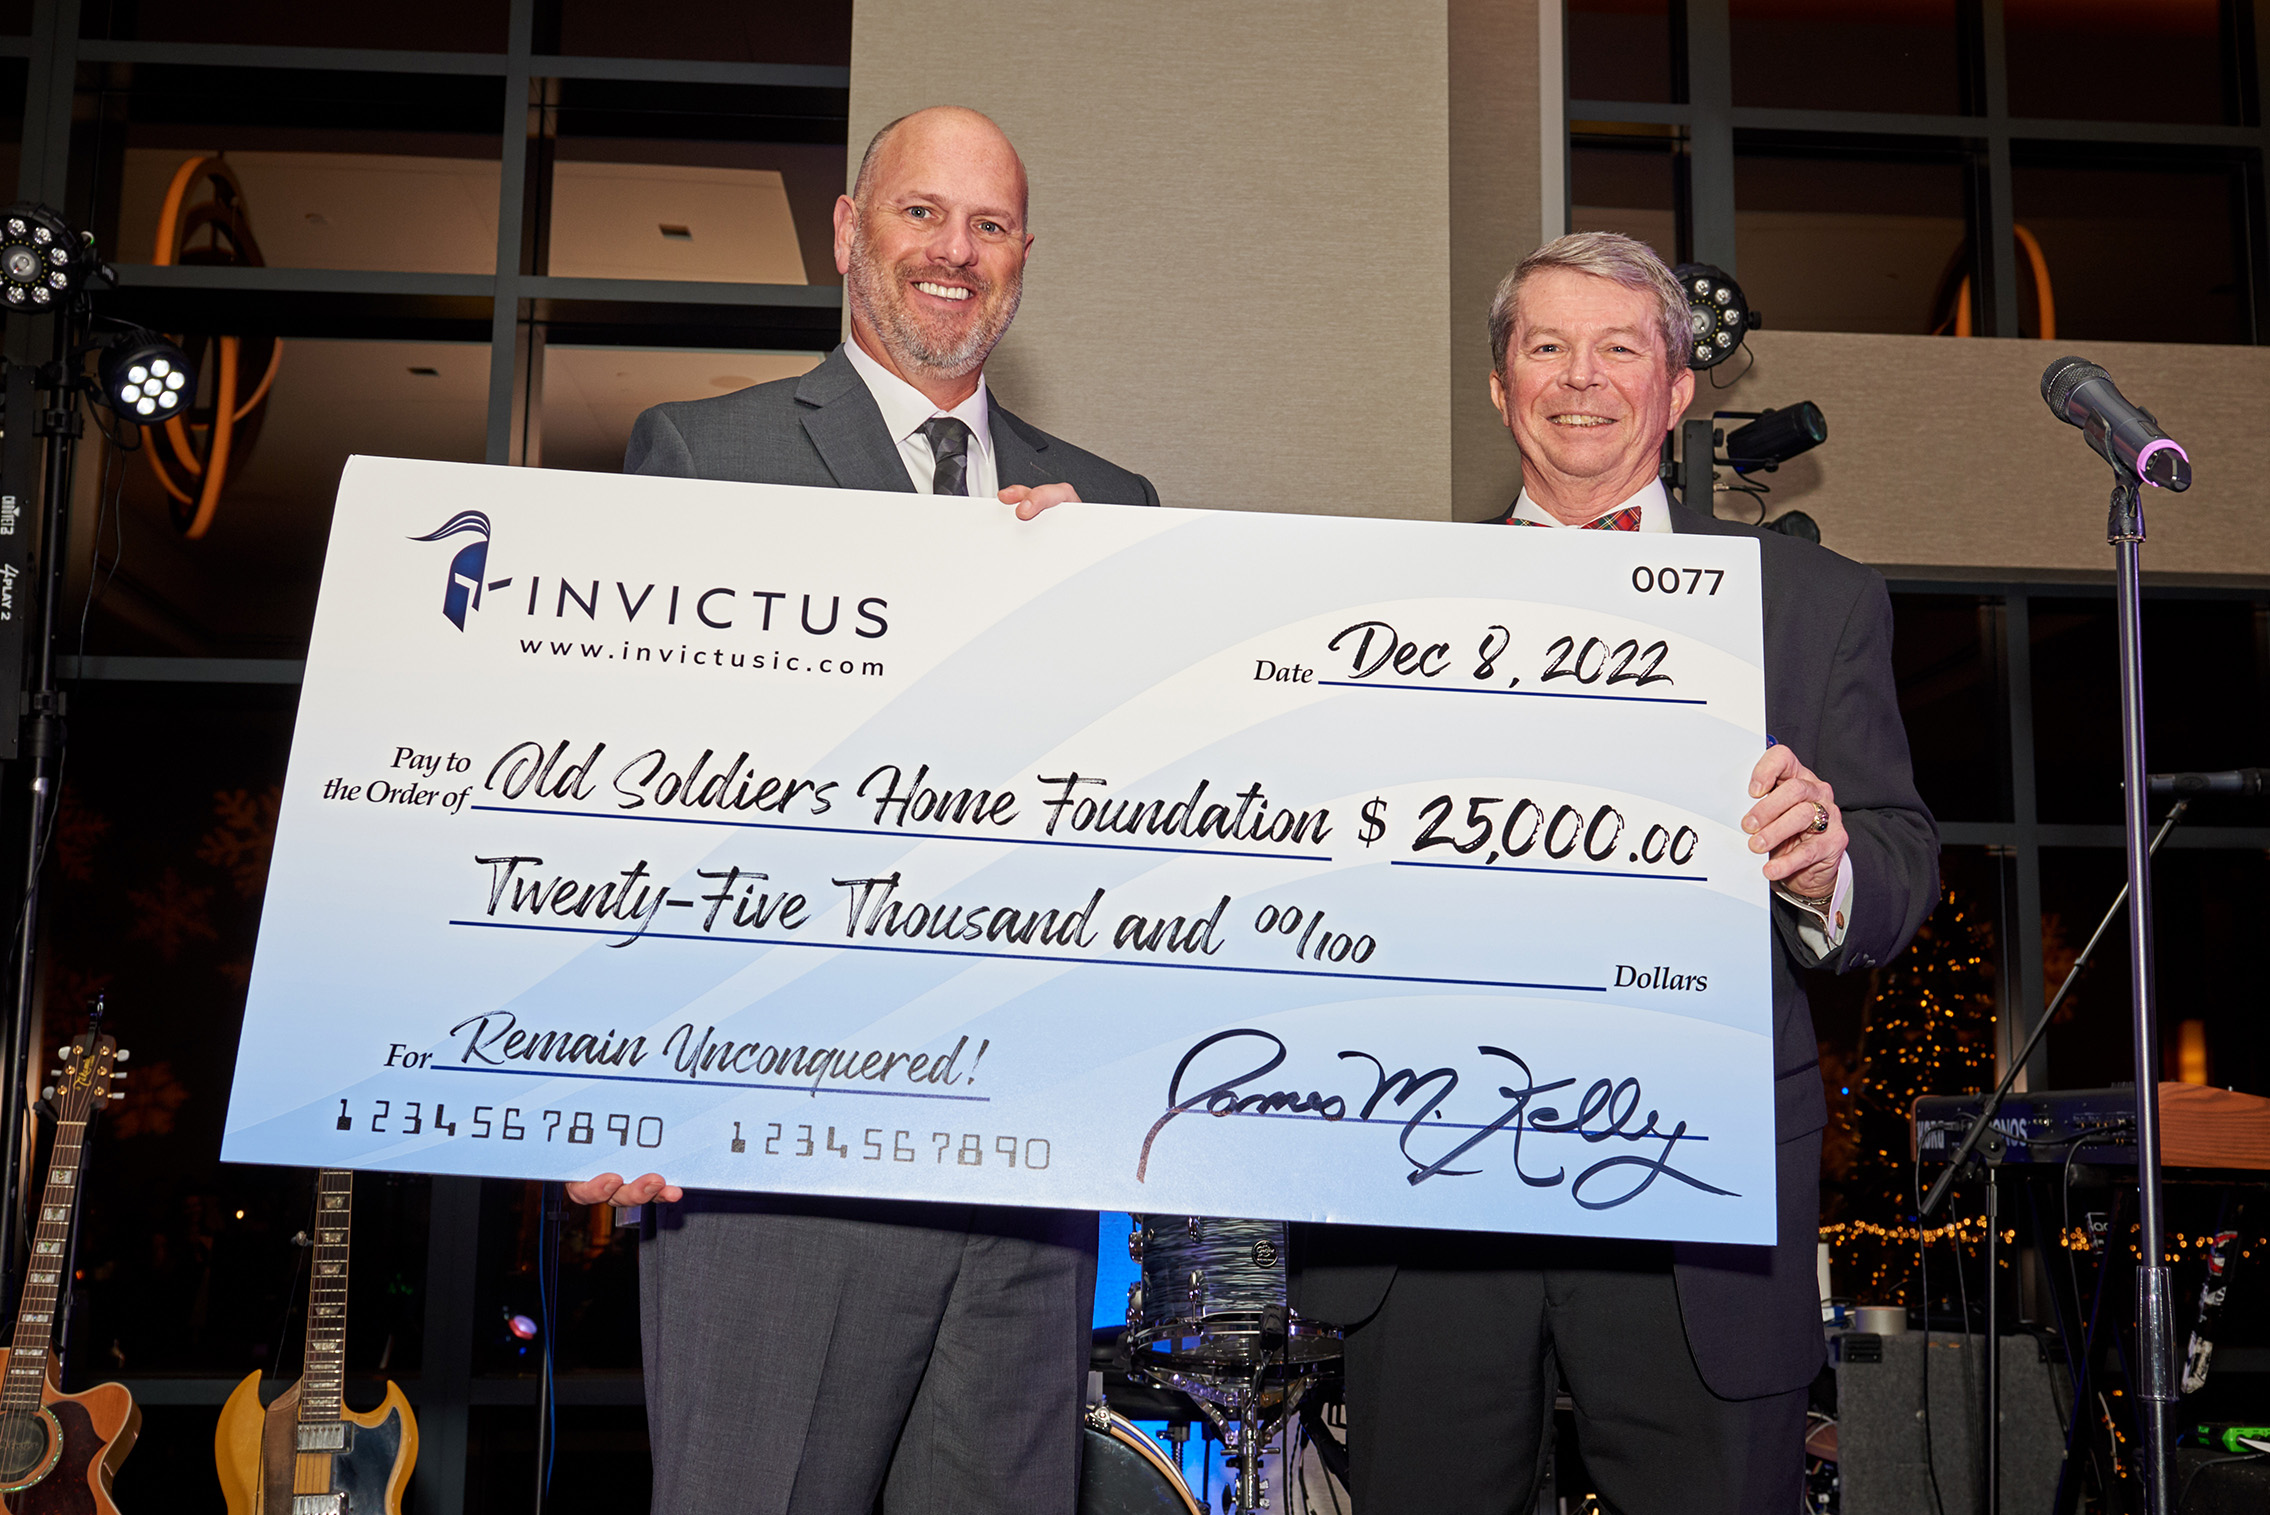 Invictus Selects The Old Soldiers Home Foundation for Annual Giving Campaign